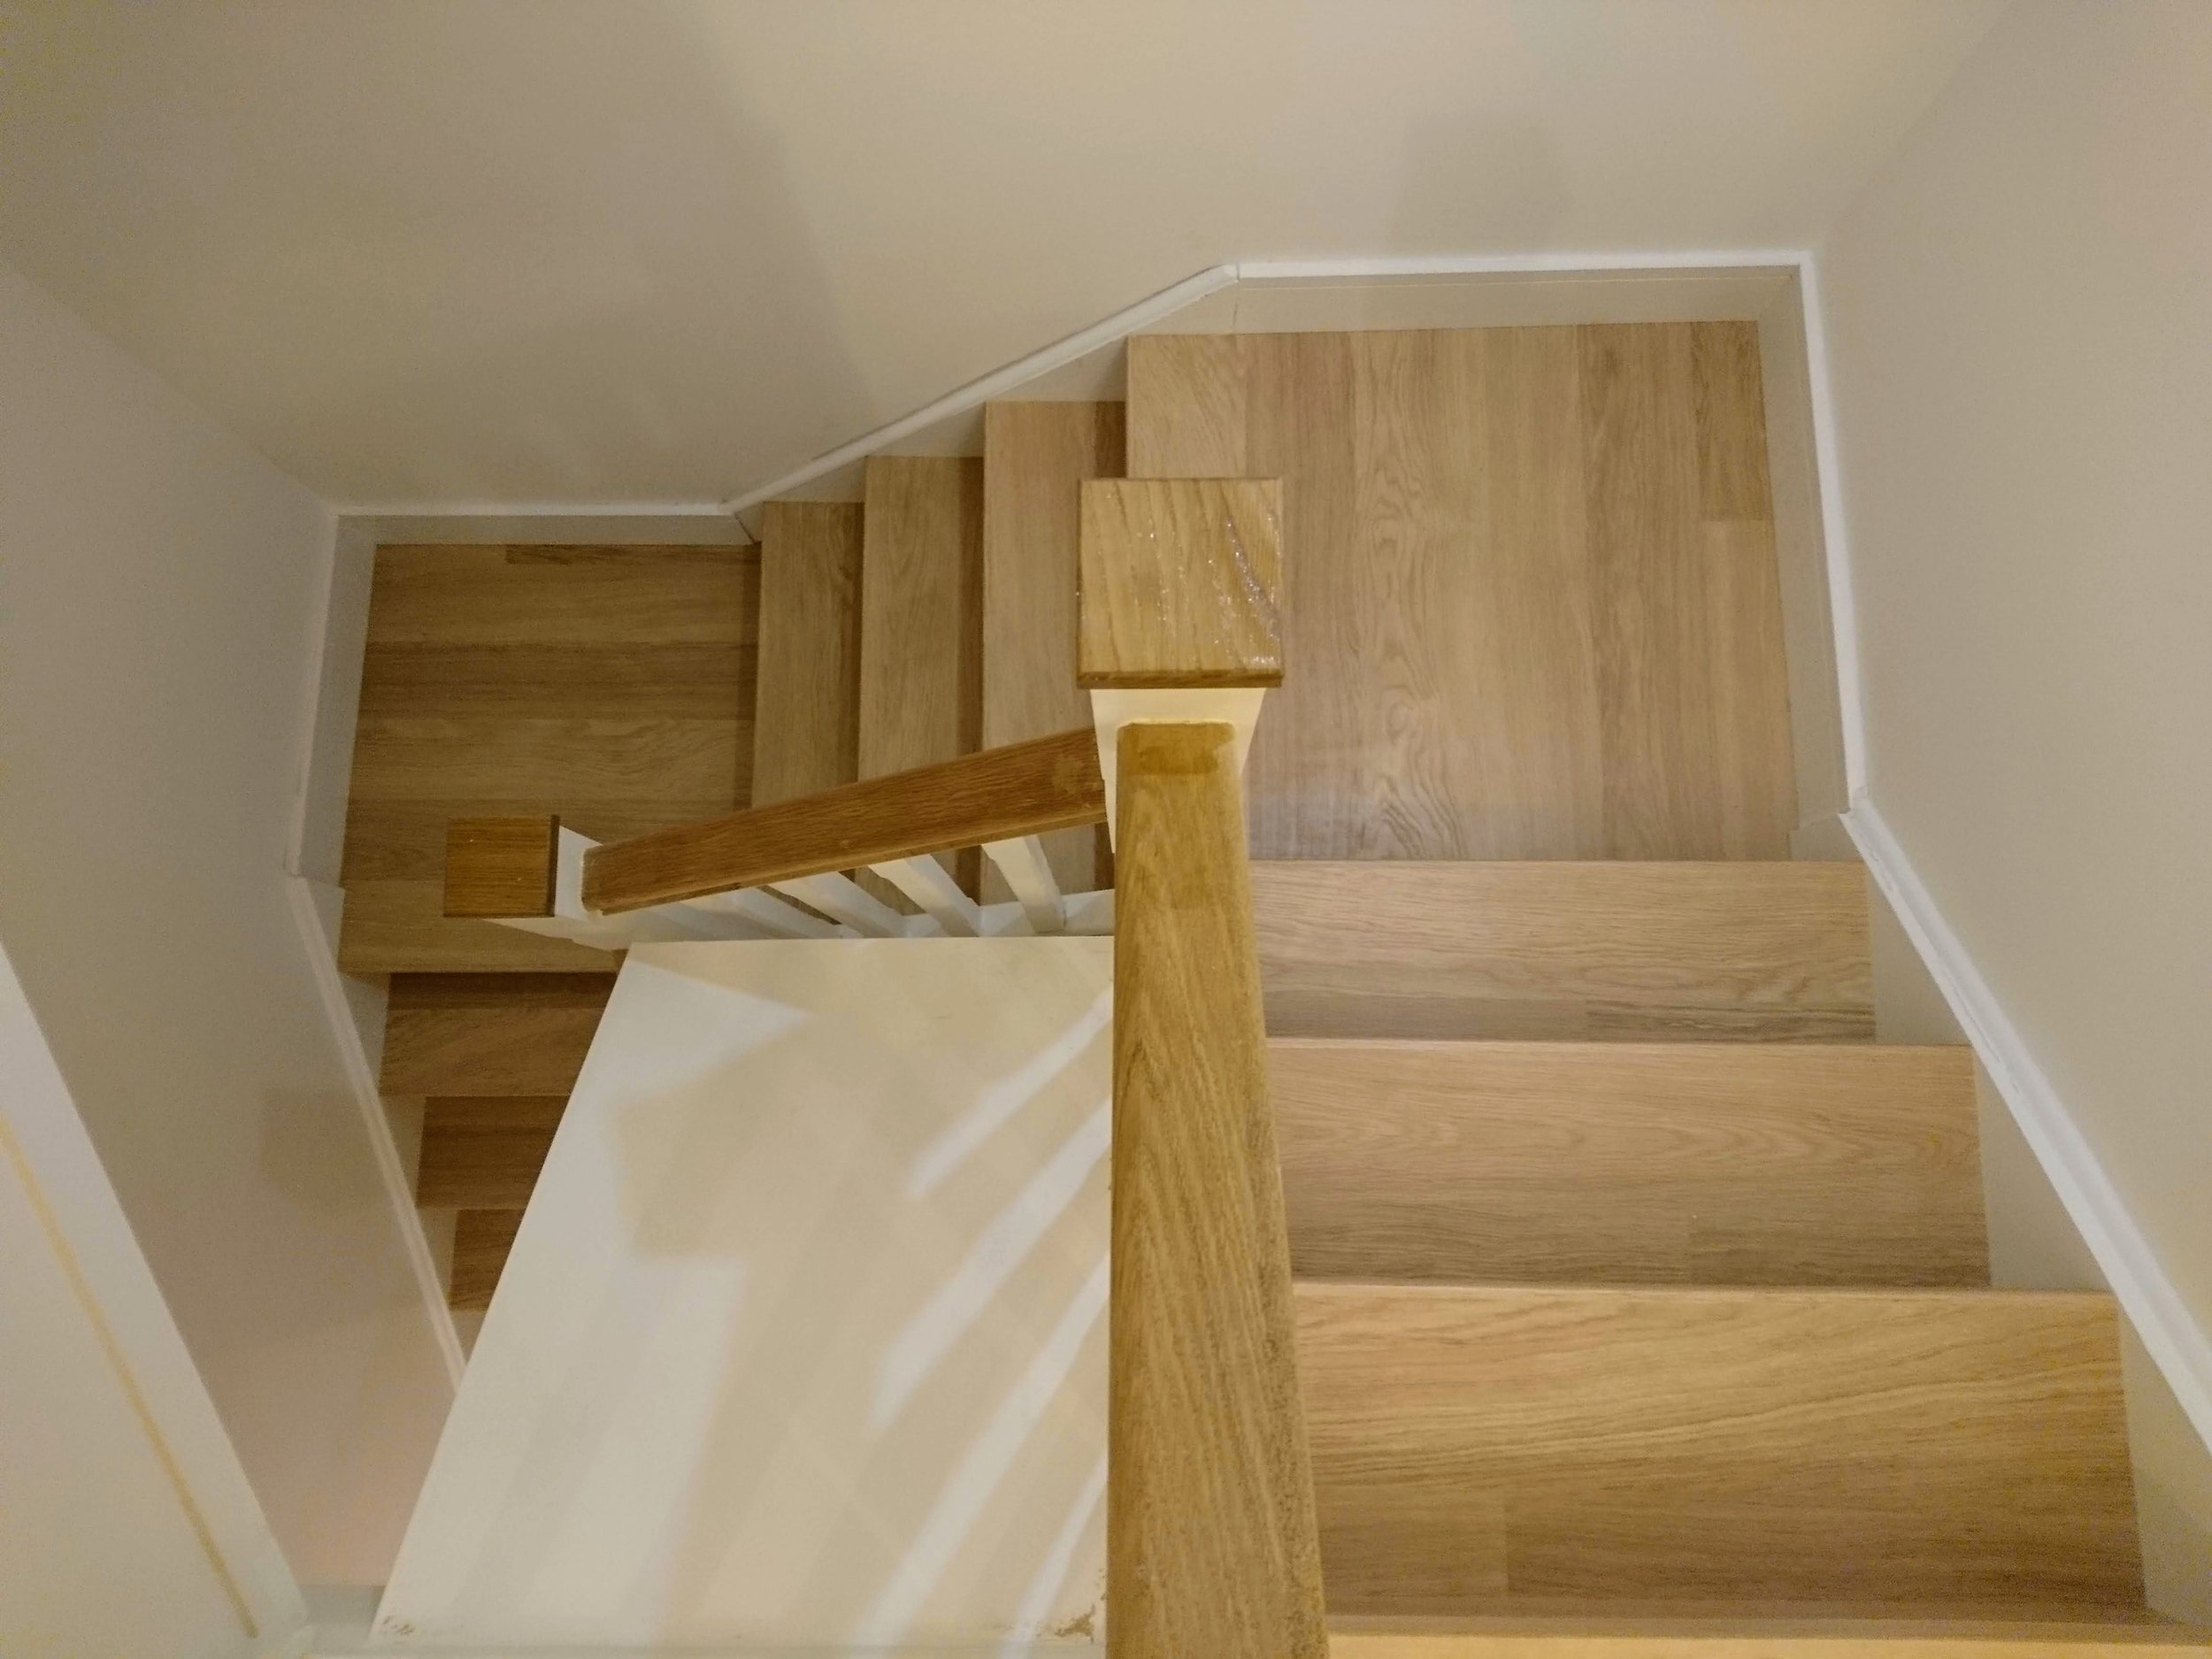 Can you put Quick-Step on stairs?